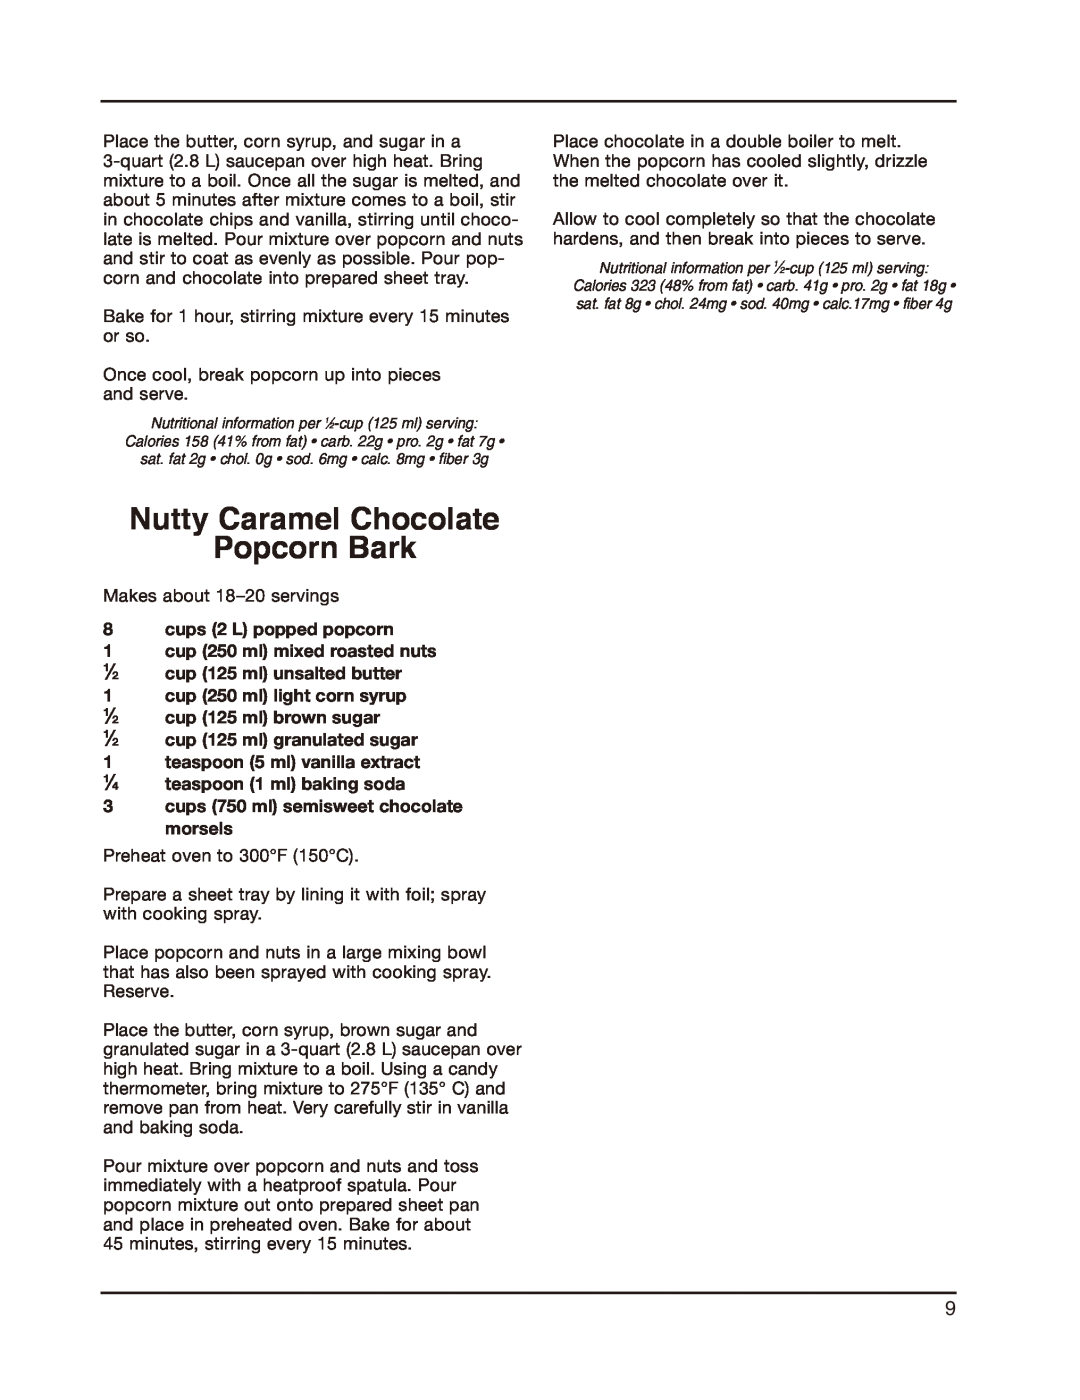 Cuisinart CPM-800C manual Nutty Caramel Chocolate Popcorn Bark, cups 2 L popped popcorn 1 cup 250 ml mixed roasted nuts 